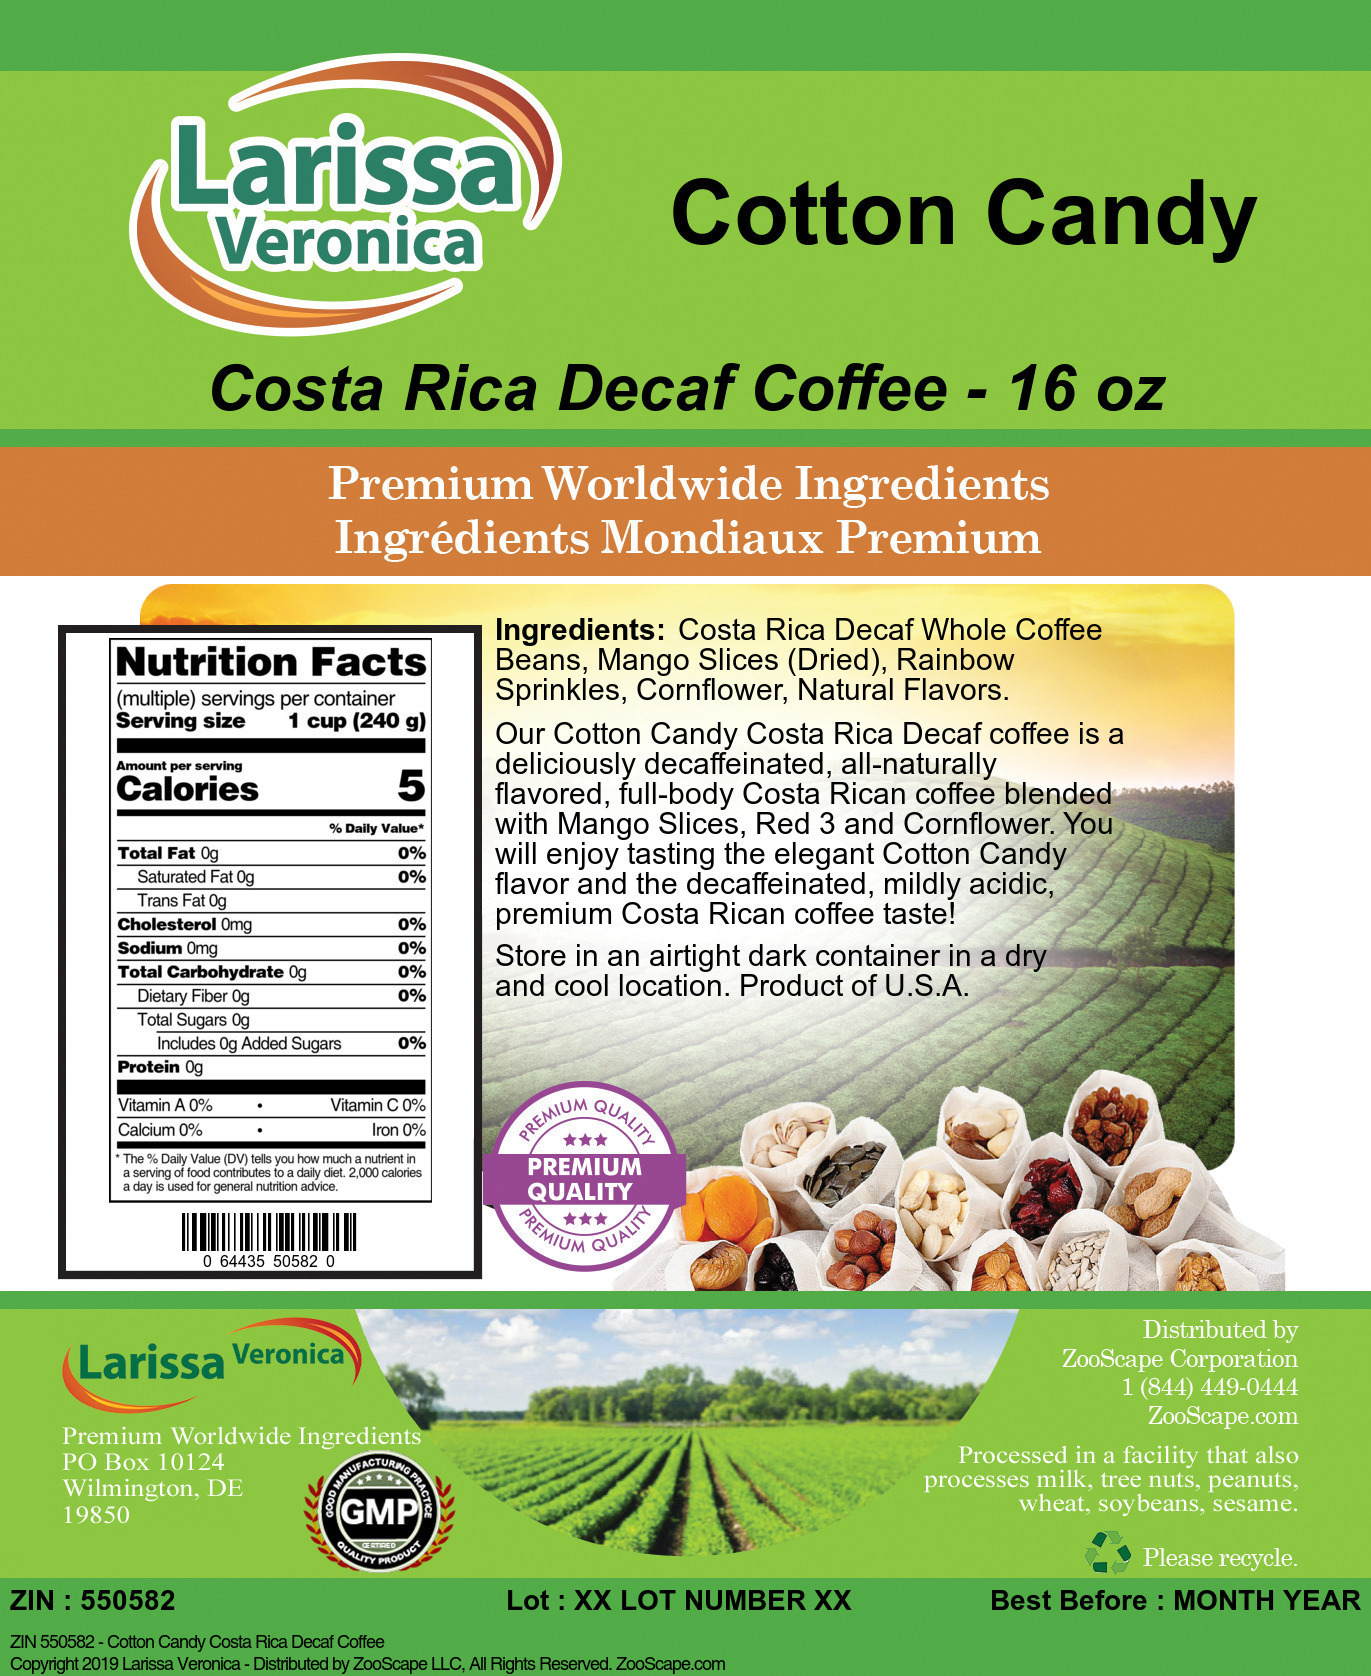 Cotton Candy Costa Rica Decaf Coffee - Label